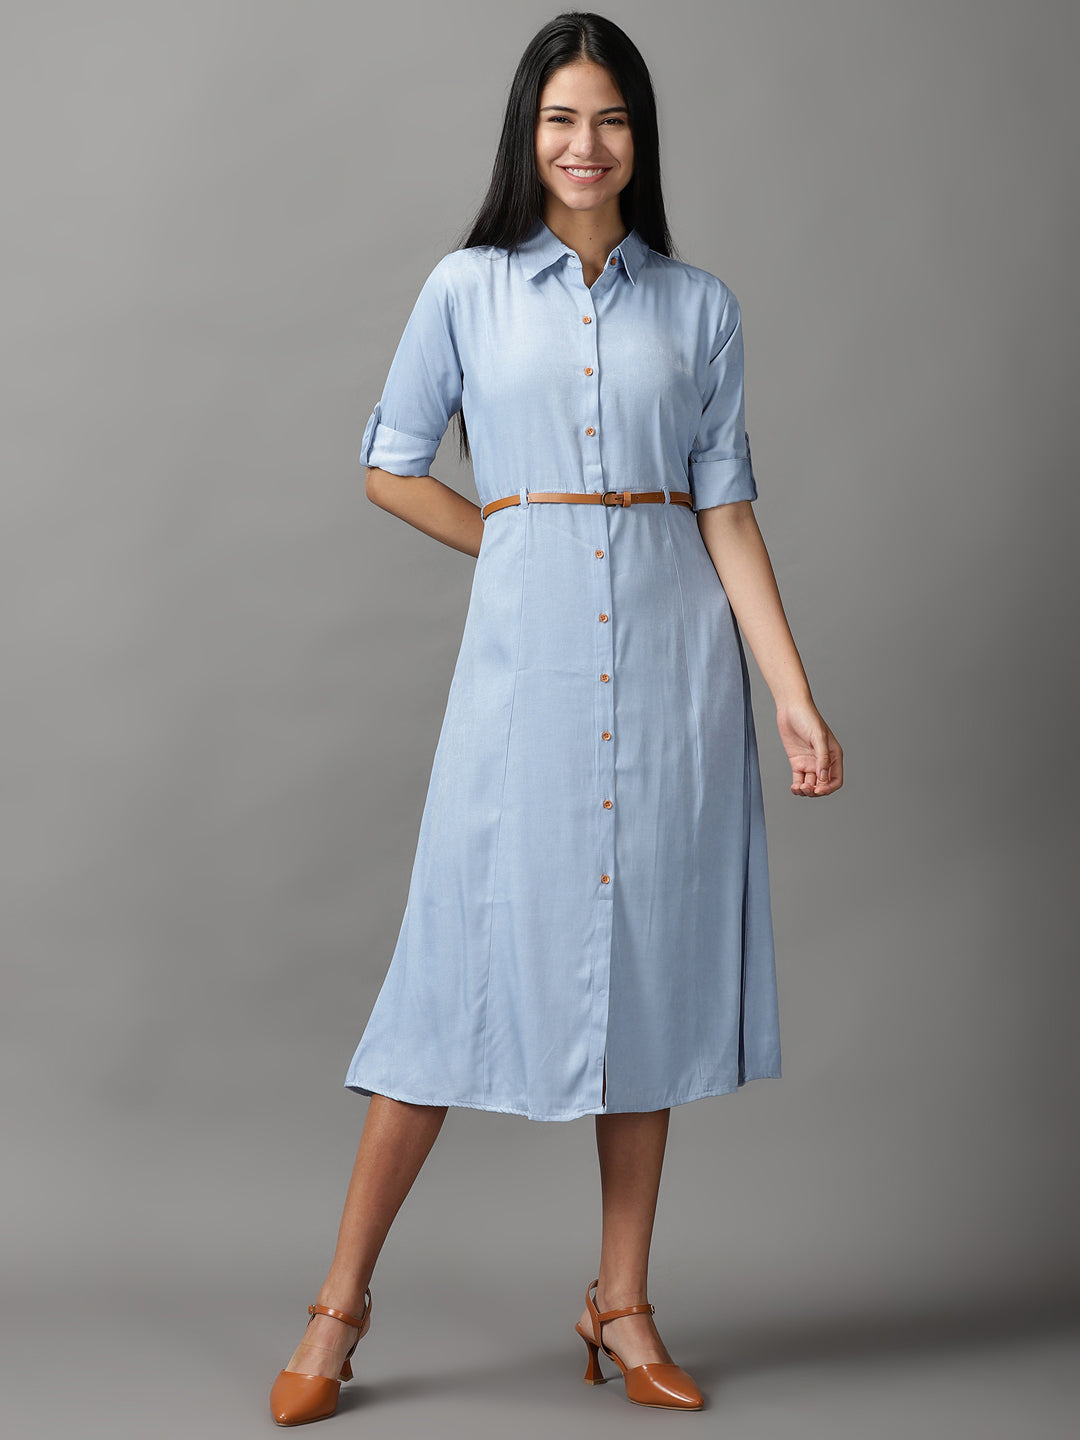 Women's Blue Solid Fit and Flare Dress